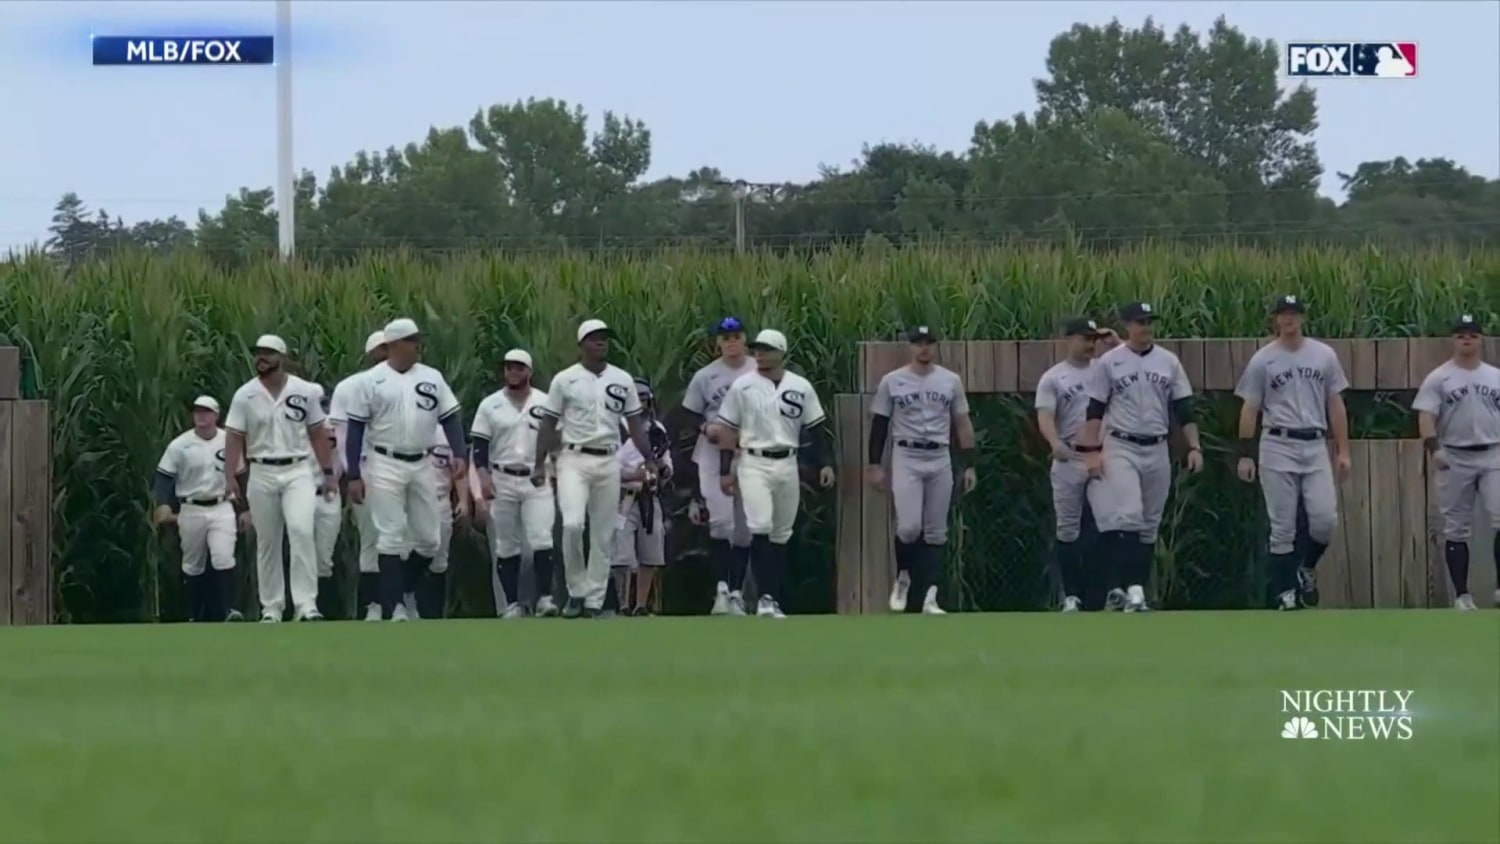 Athletes, actors take over Field of Dreams in Dyersville before game